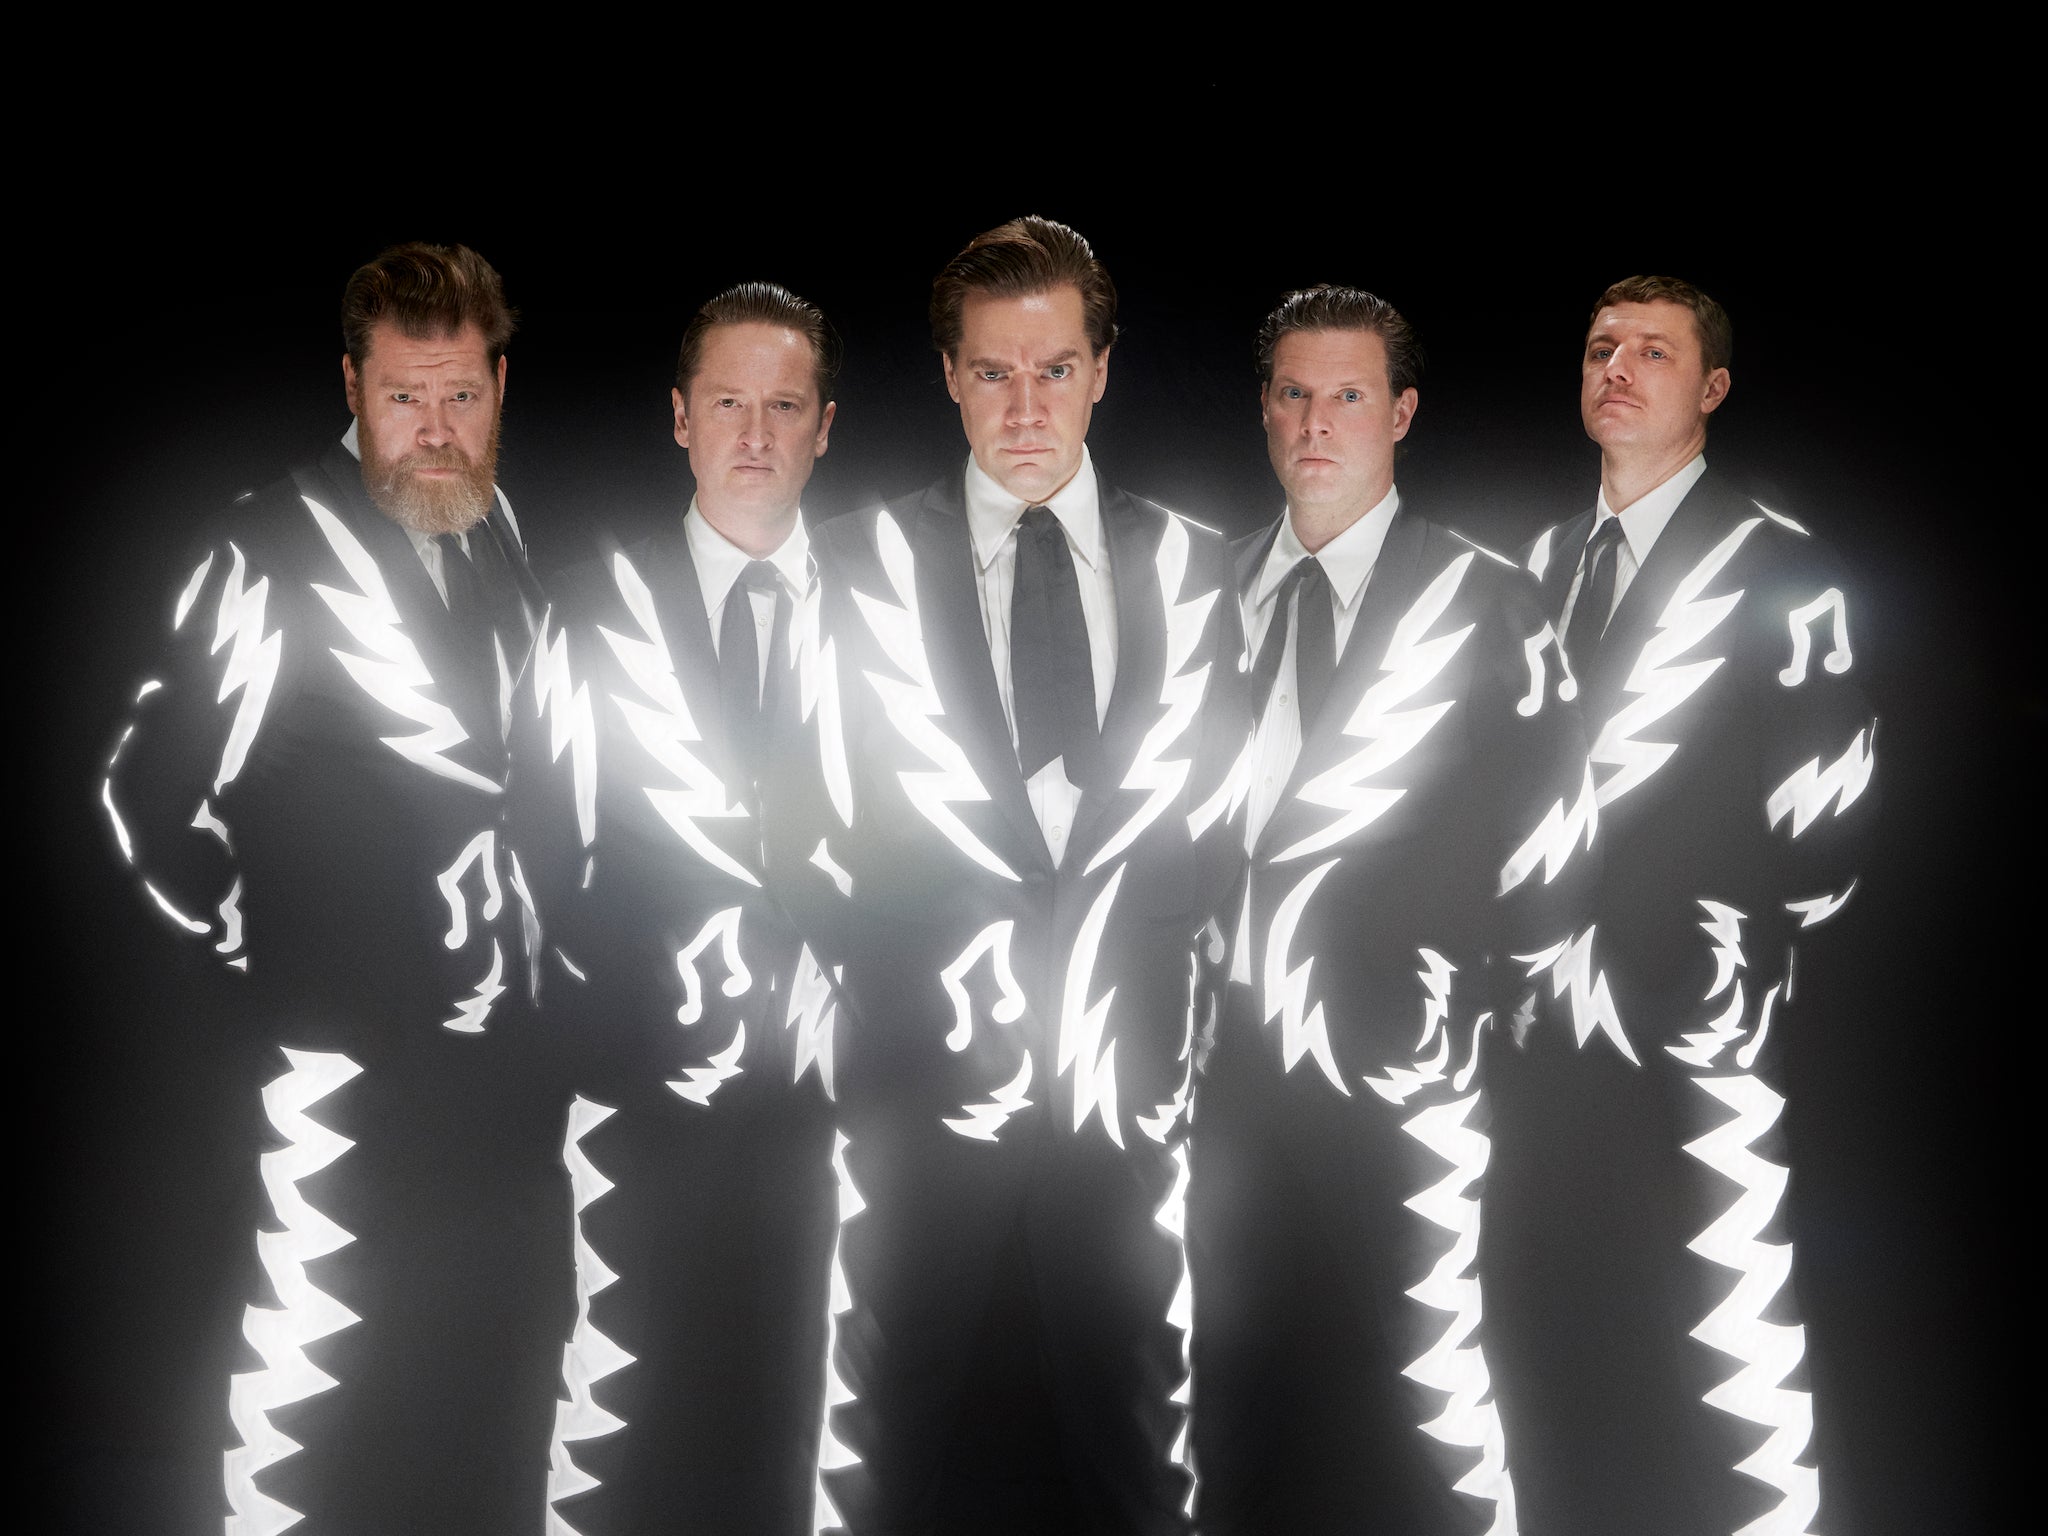 Fronted by Pelle Almqvist, The Hives came out of Sweden in the early Noughties